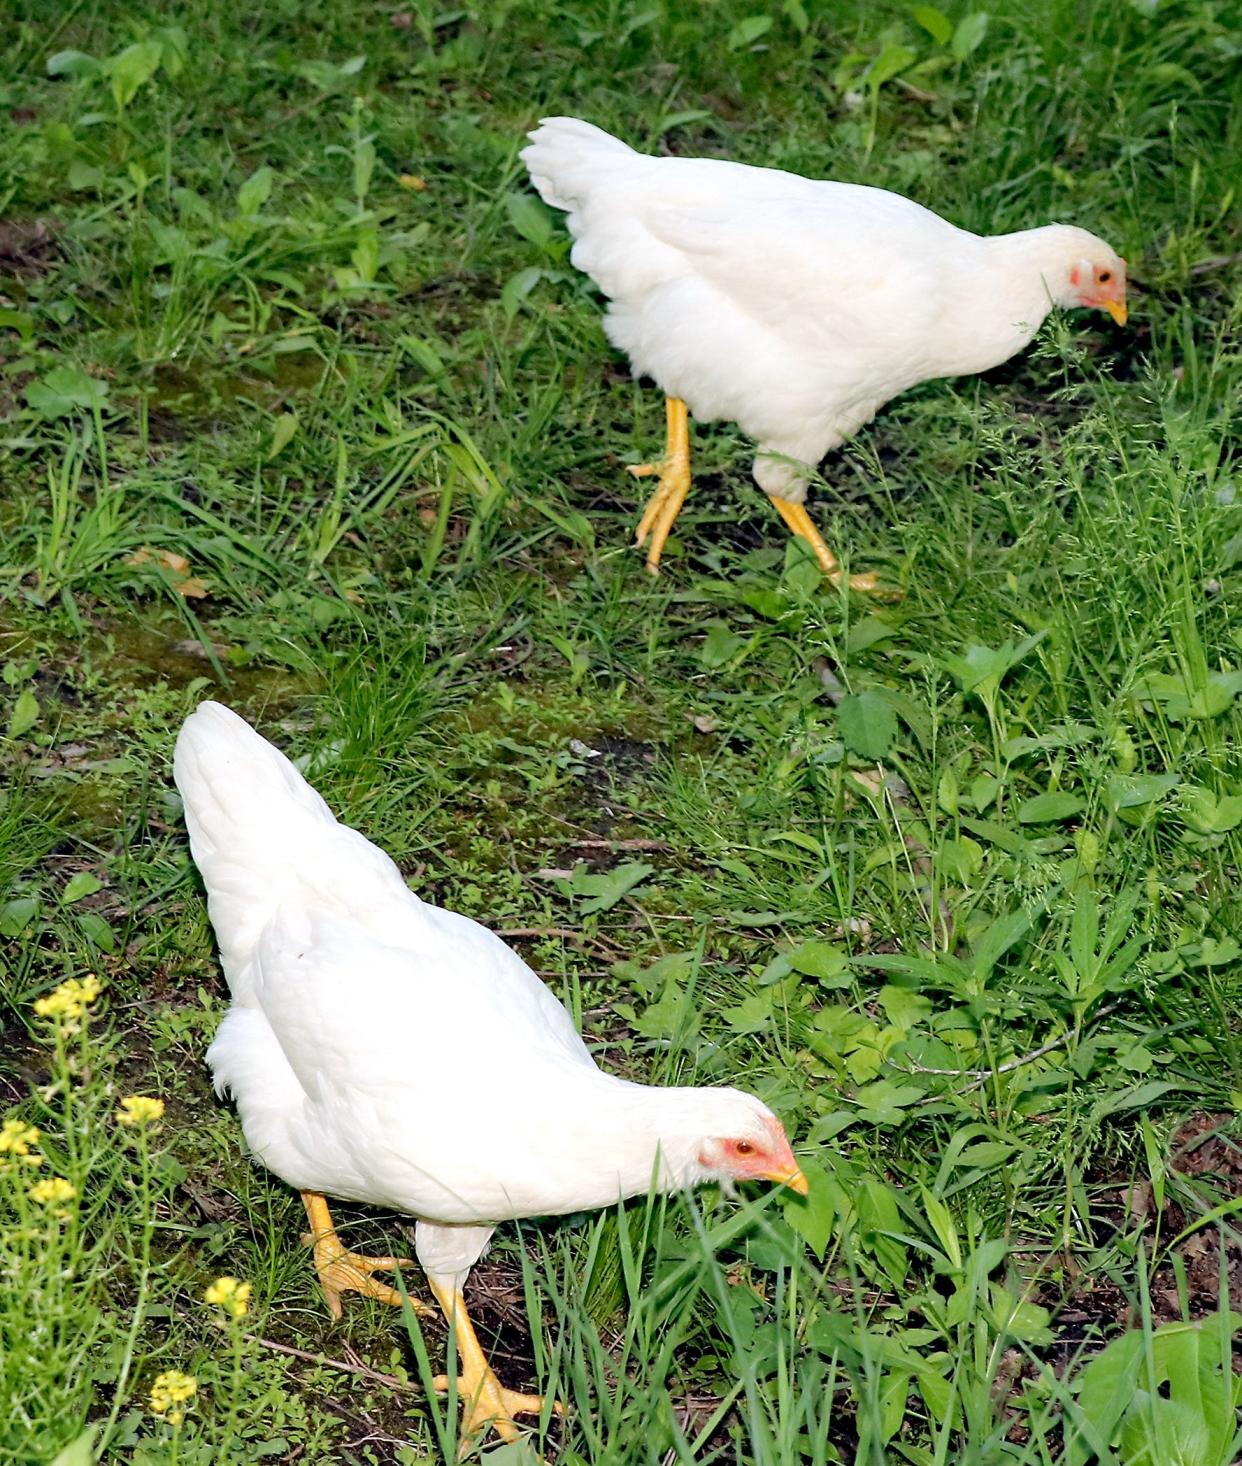 Residents are being reminded to protect their backyard poultry flocks.